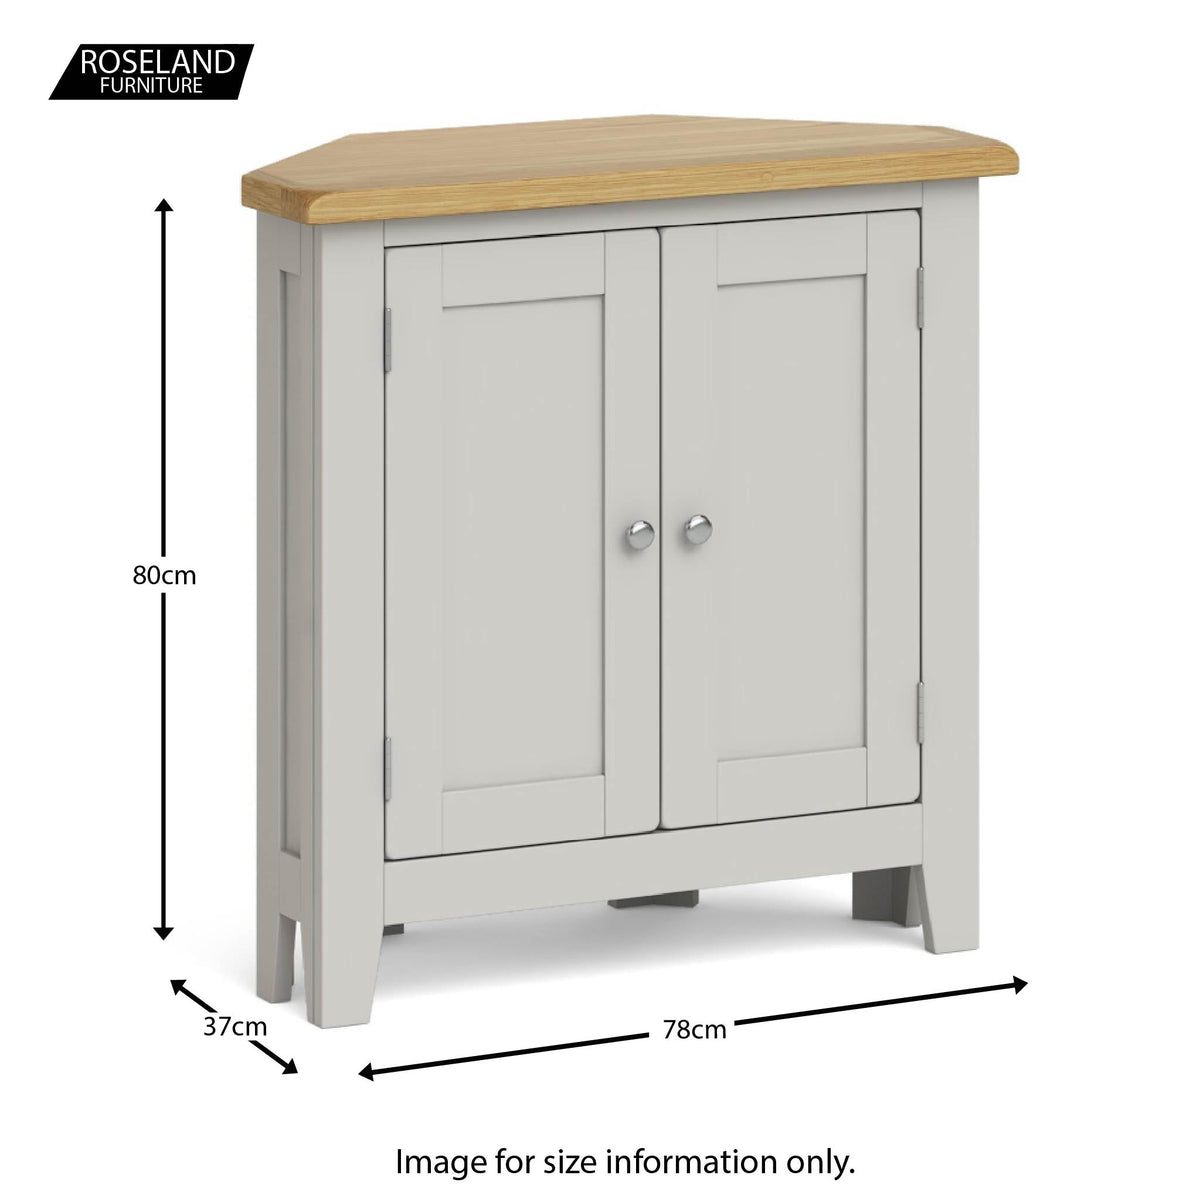 Lundy Grey Small Corner Cabinet - Size guide